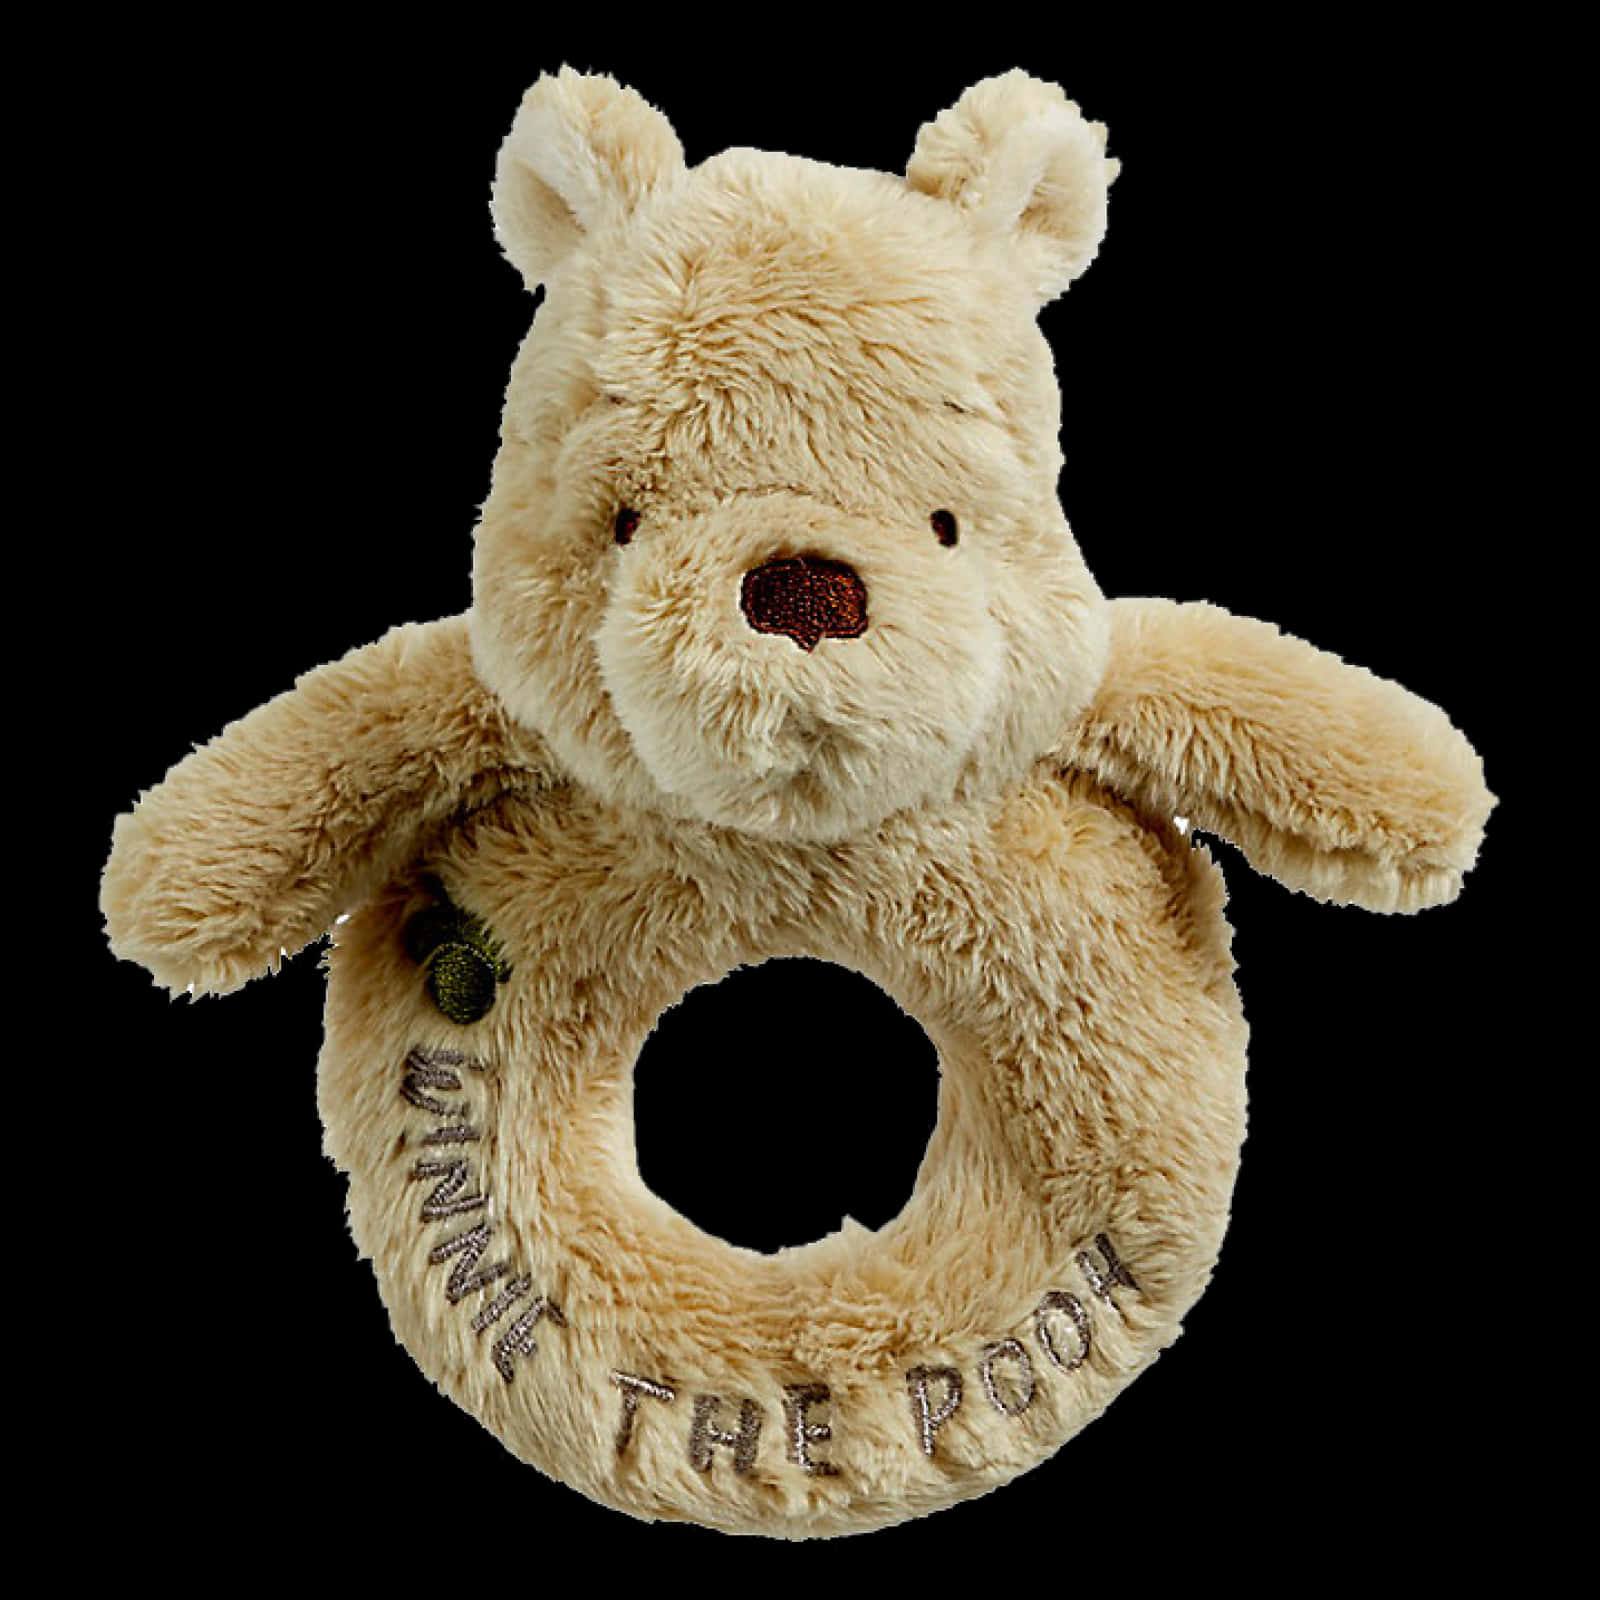 A Stuffed Animal With A Ring